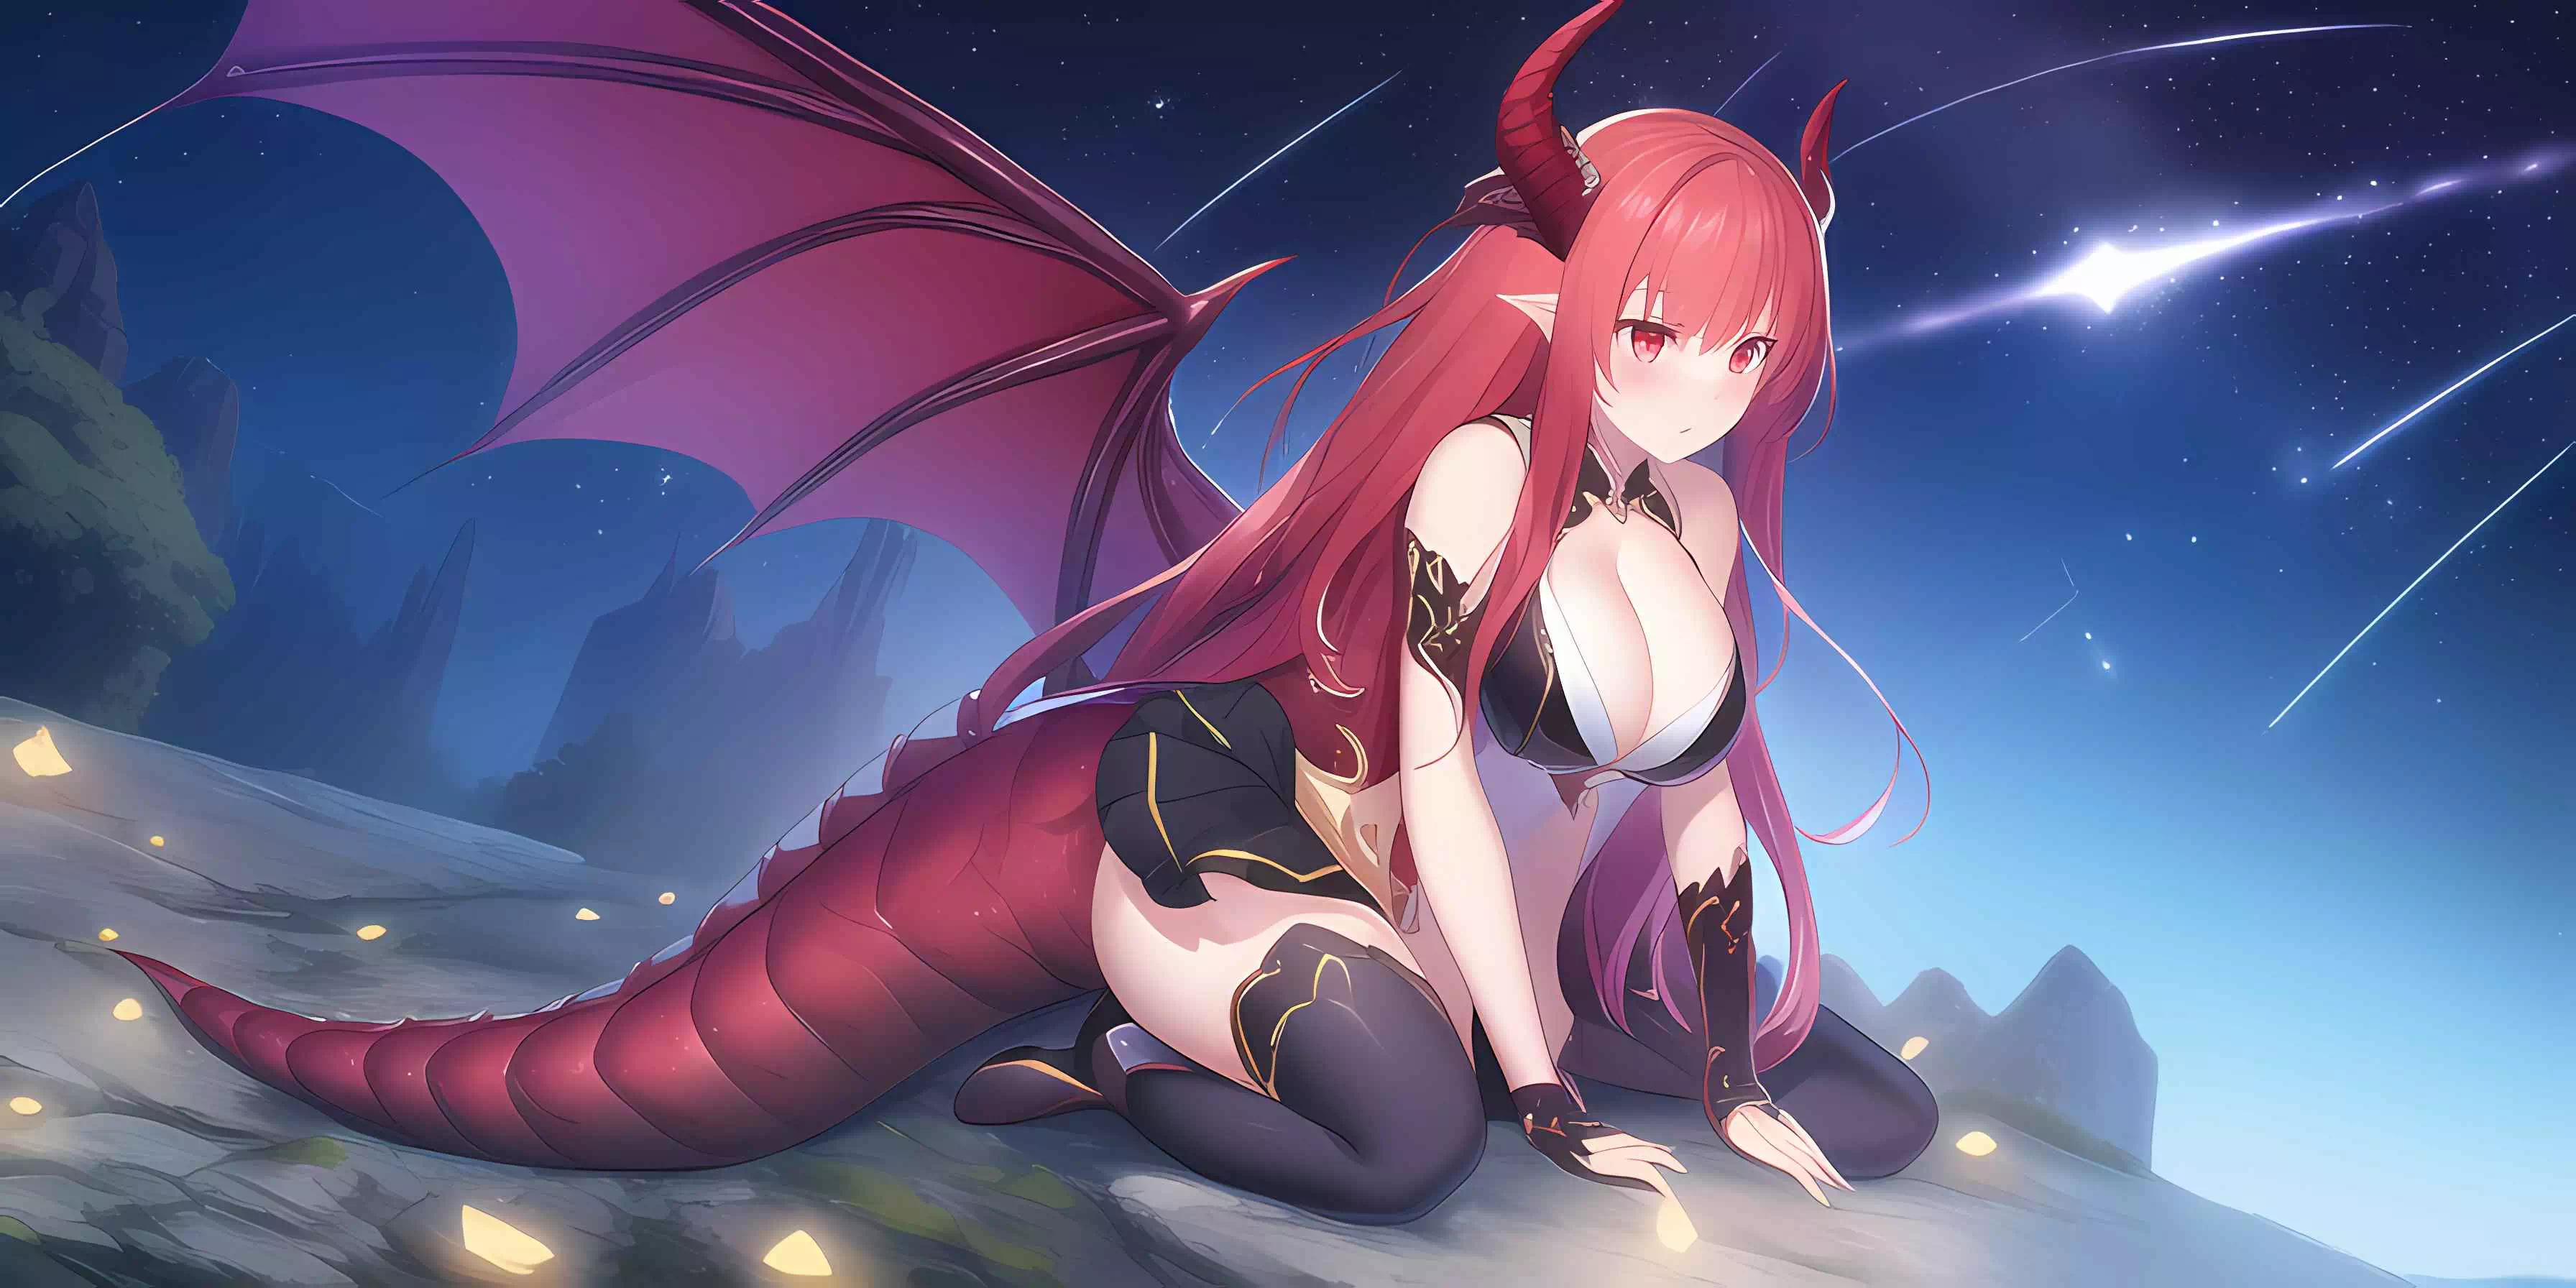 More Red Dragon Girl